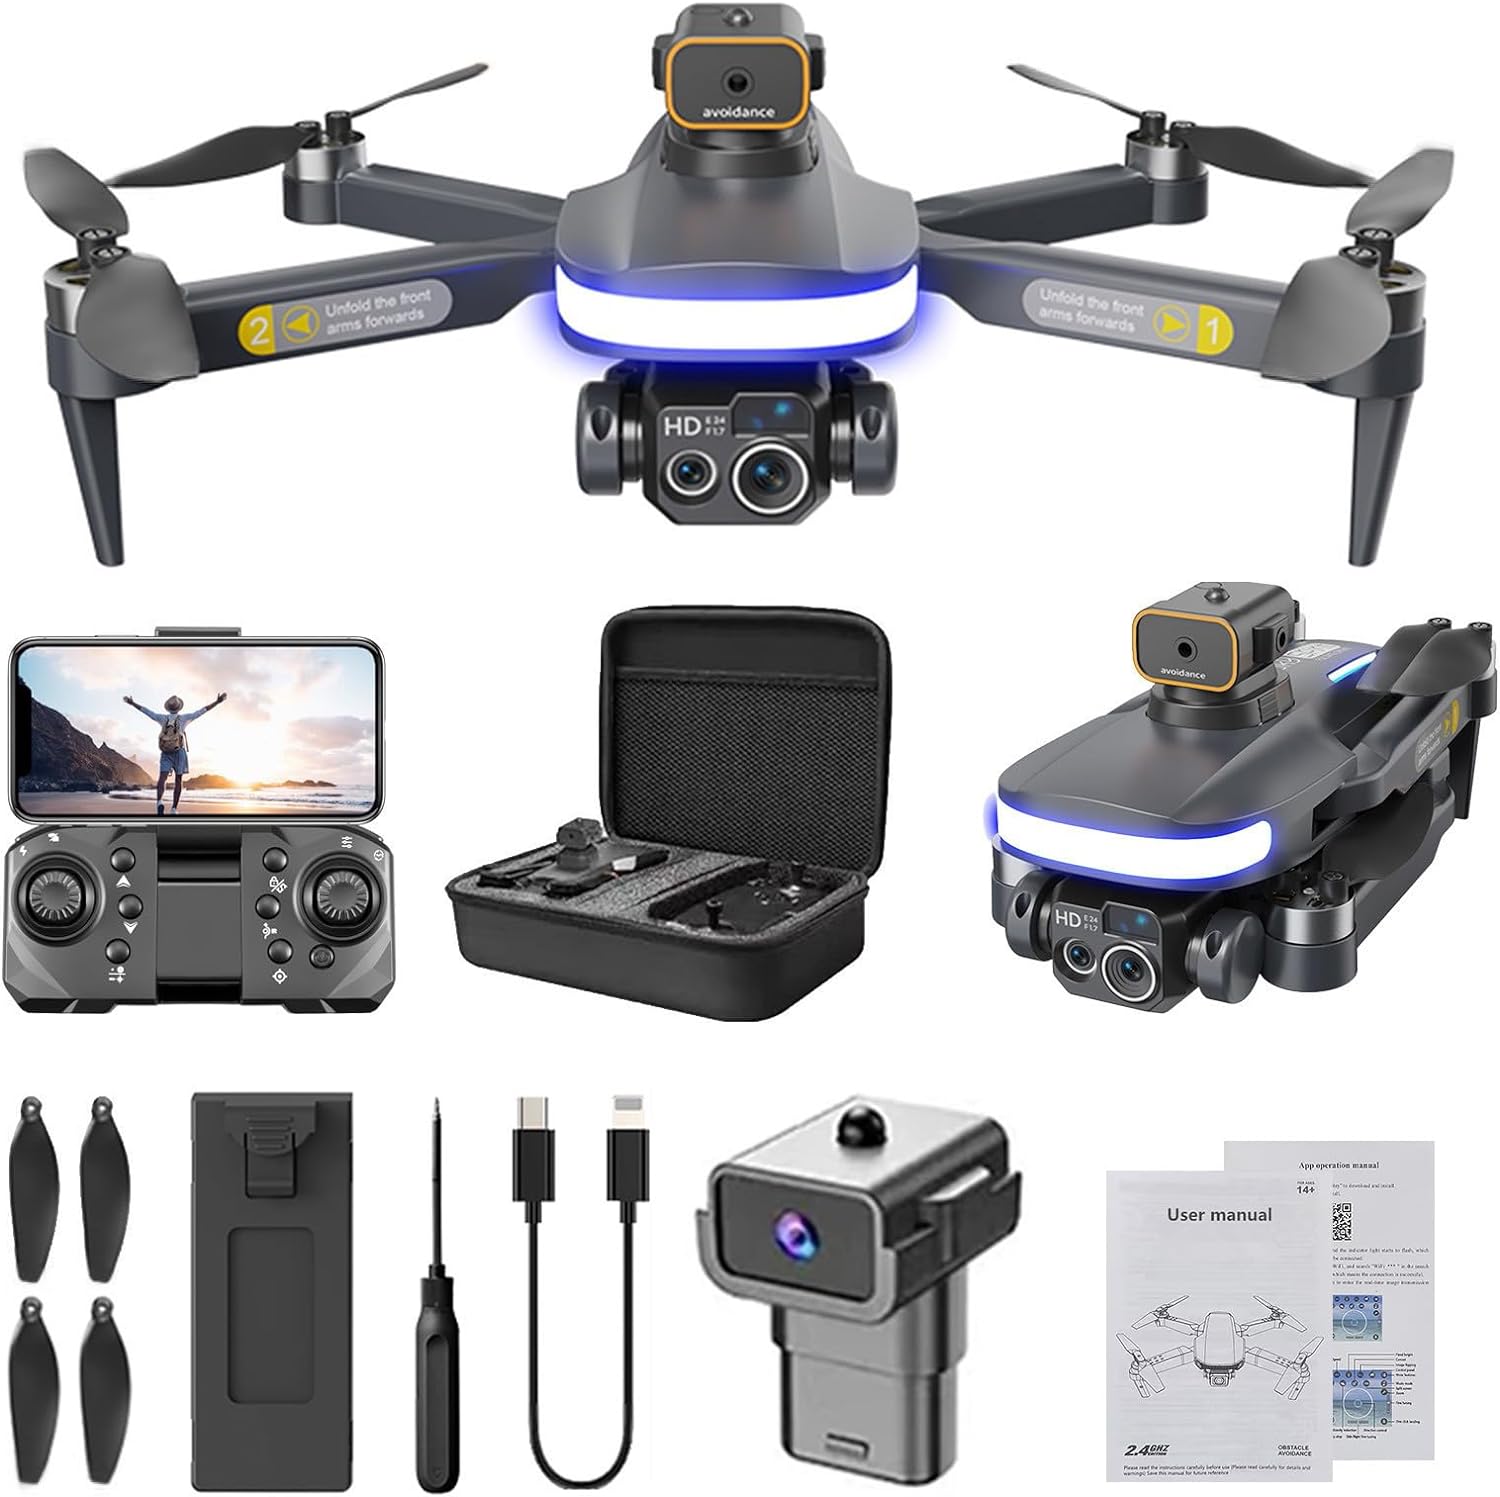 Wifi Fpv Drone with 4k HD Camera, Foldable Rc Drone Quadcopter Circle Fly, Route Fly, Altitude Hold, Headless Mode, Easy to Install and Take Perfect for Travel Camping